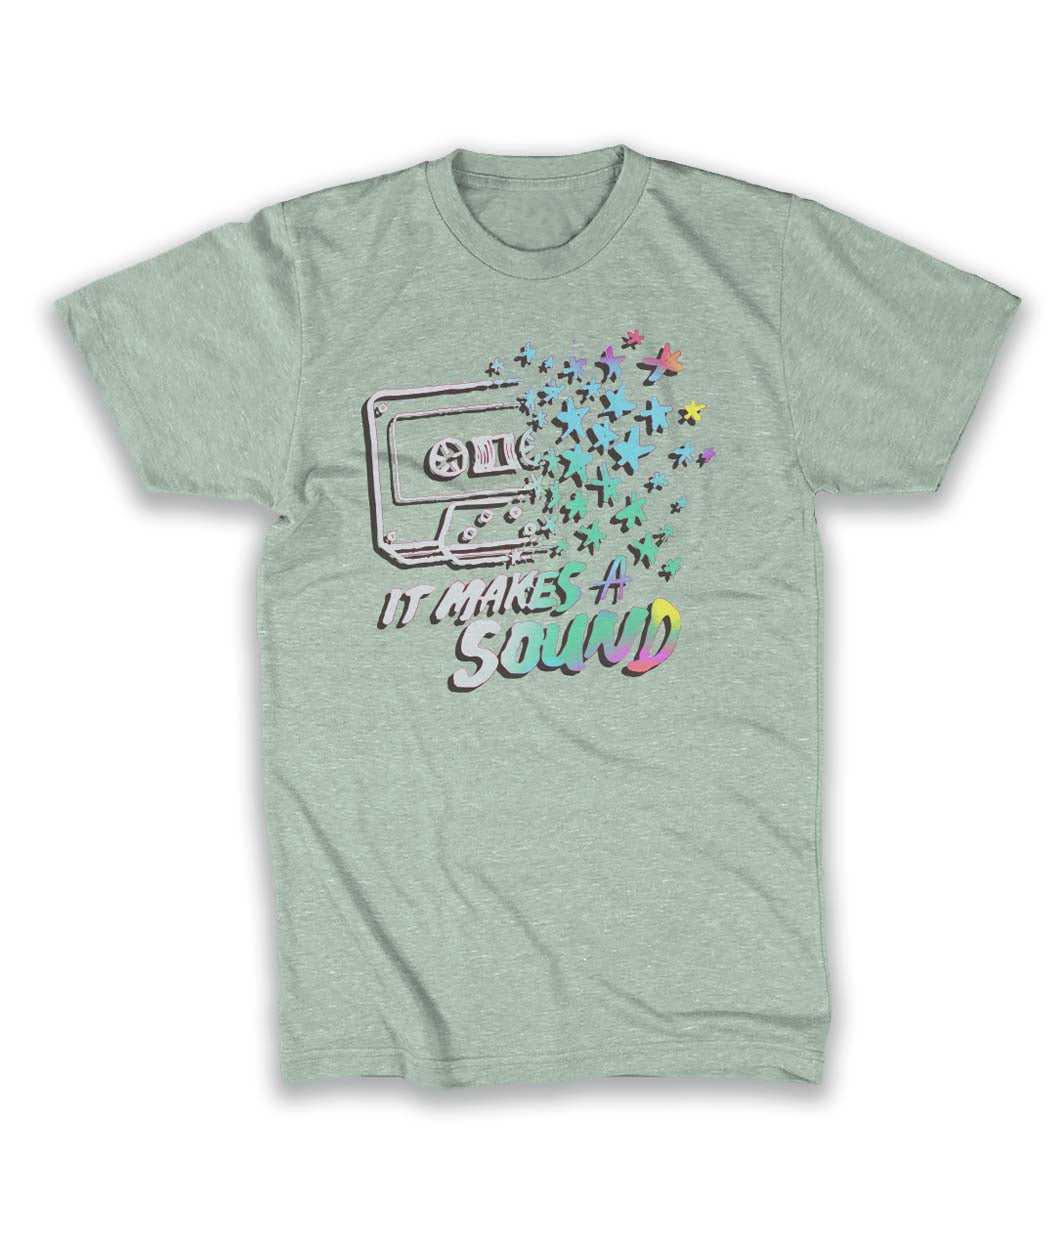 A mint t-shirt  with a cassette tape dissolving into colorful stars. The words "It Makes a Sound" are written below.